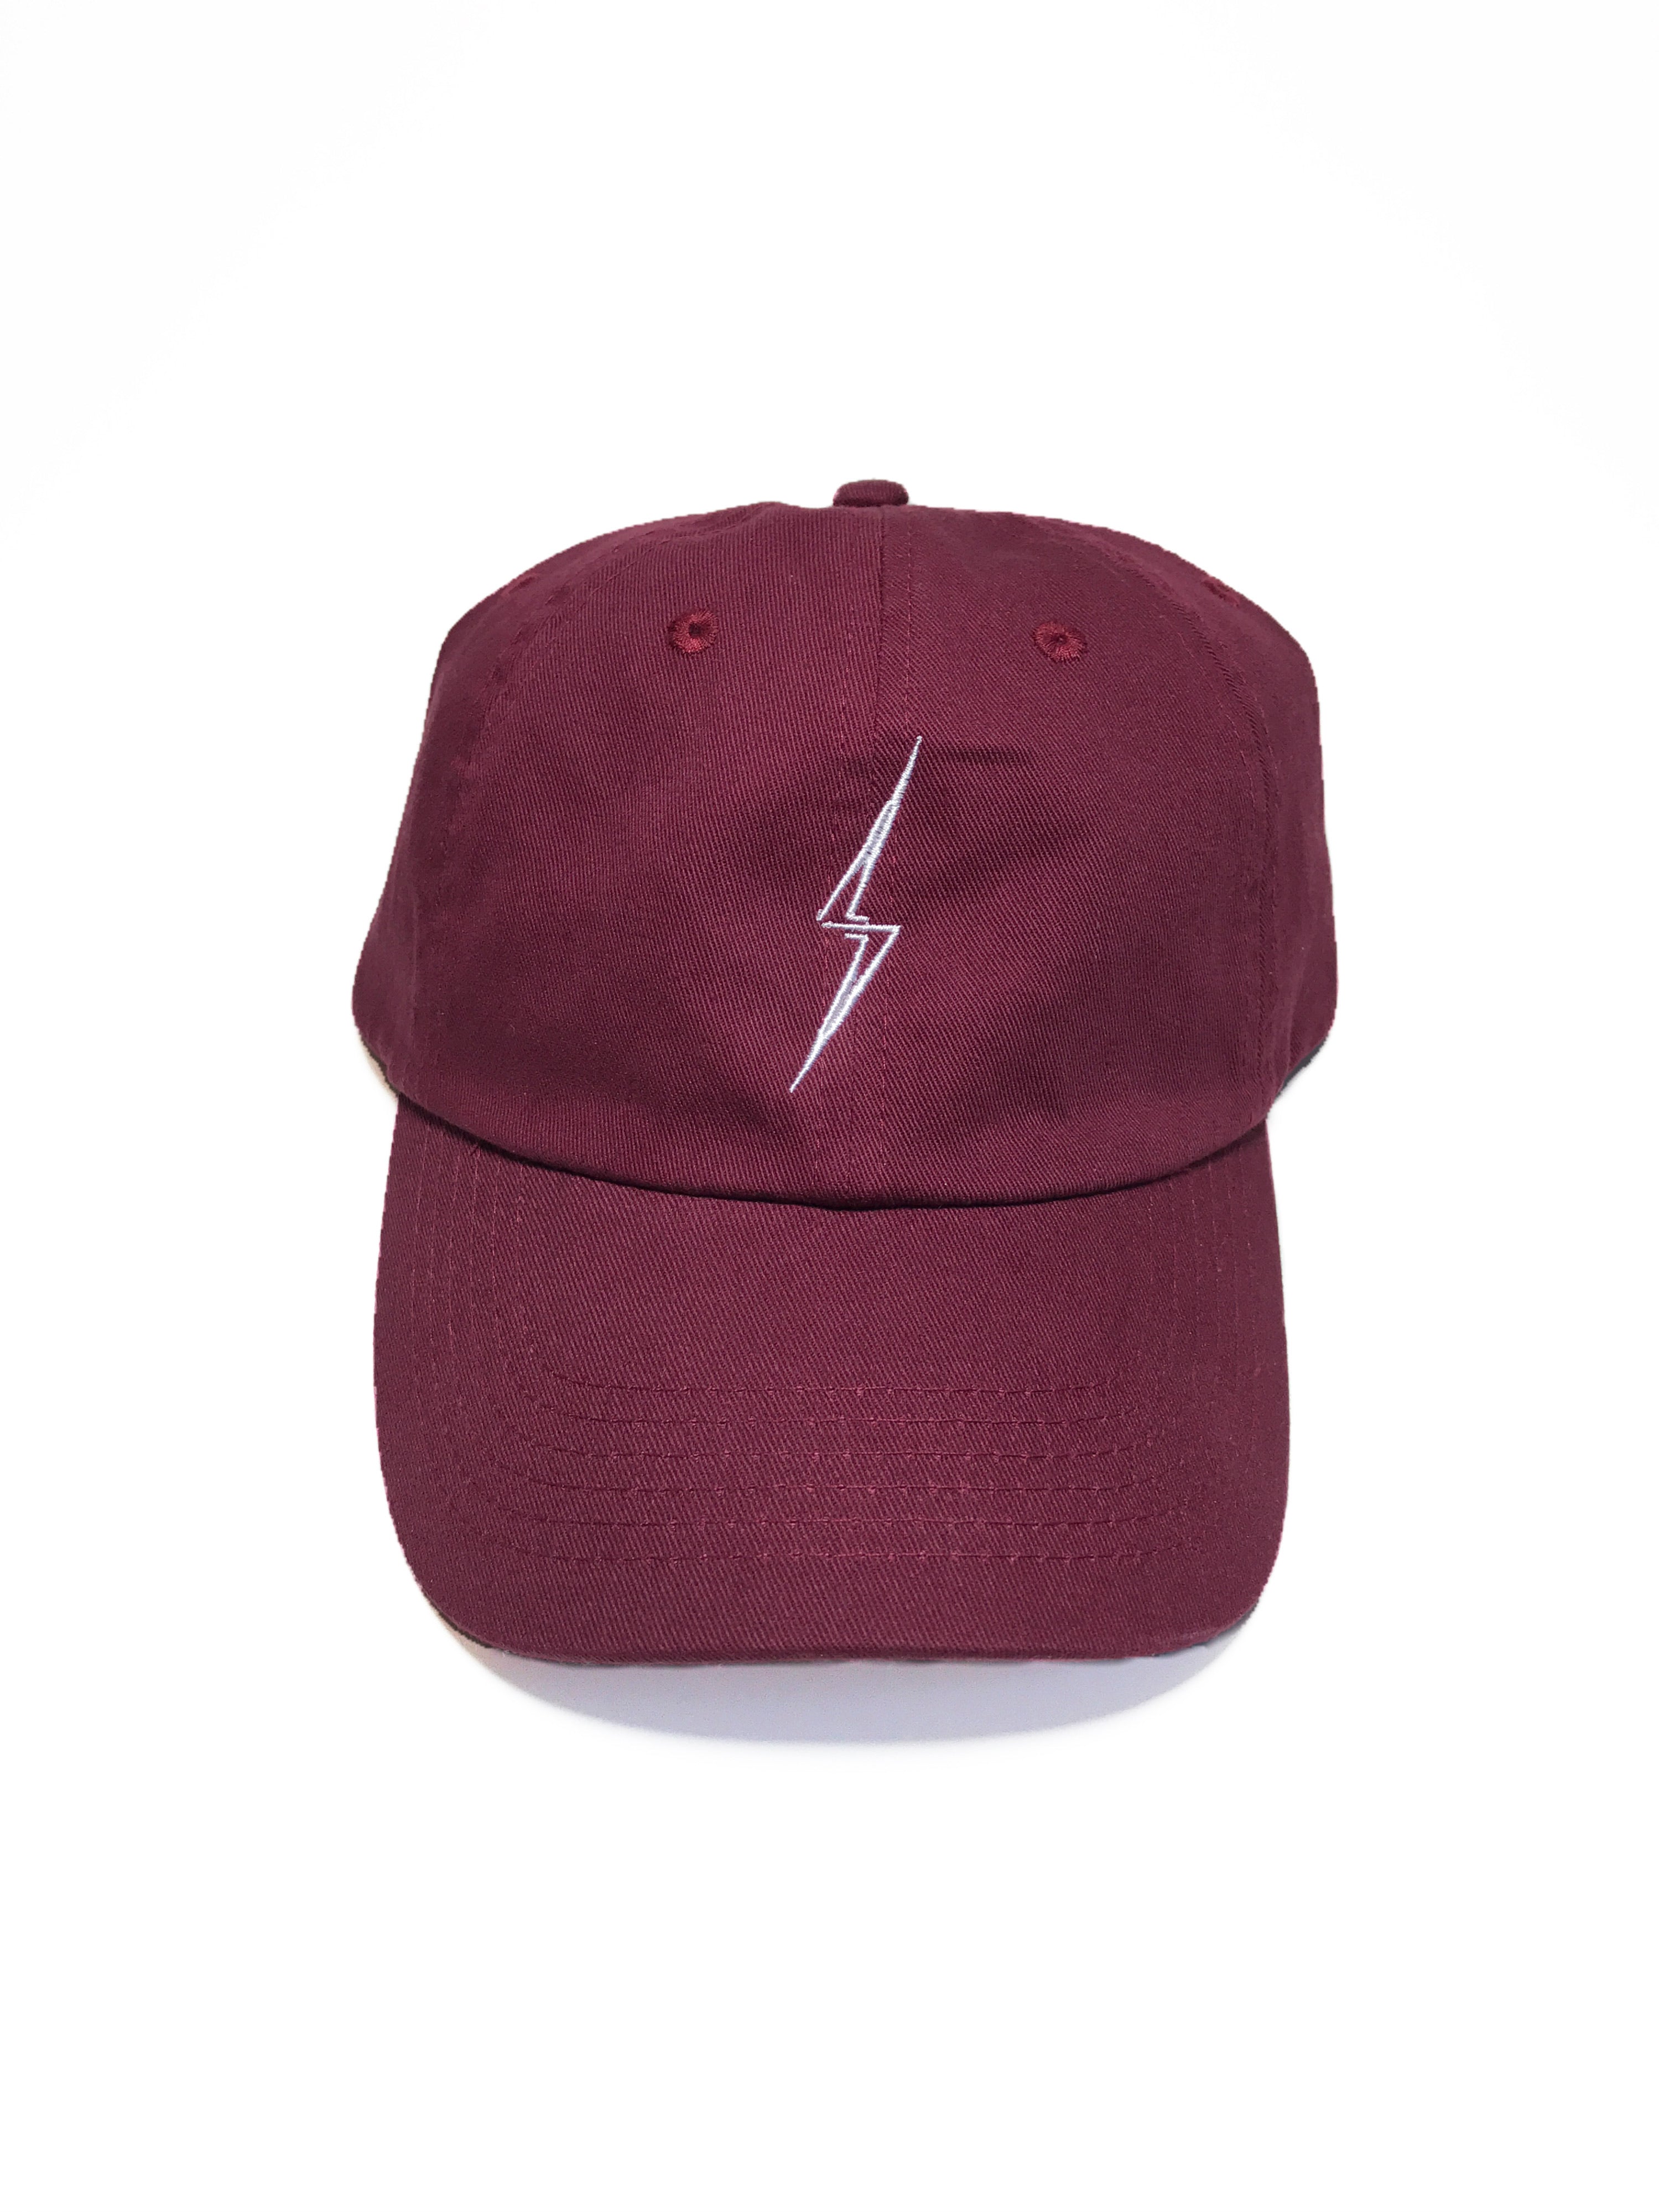 Classic Bolt Dad Hat-Maroon/White